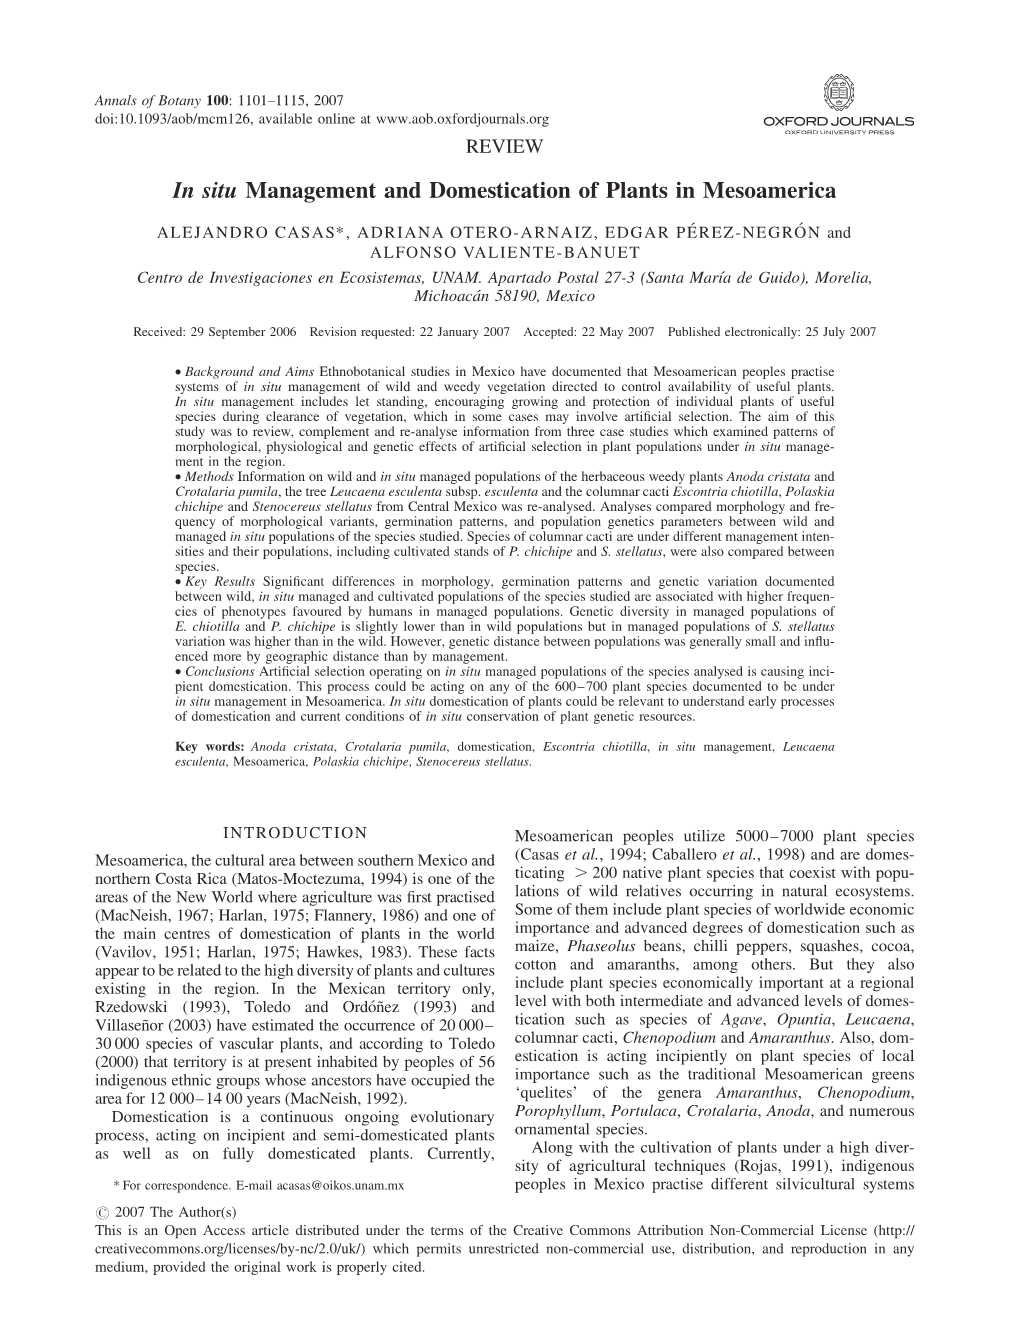 In Situ Management and Domestication of Plants in Mesoamerica